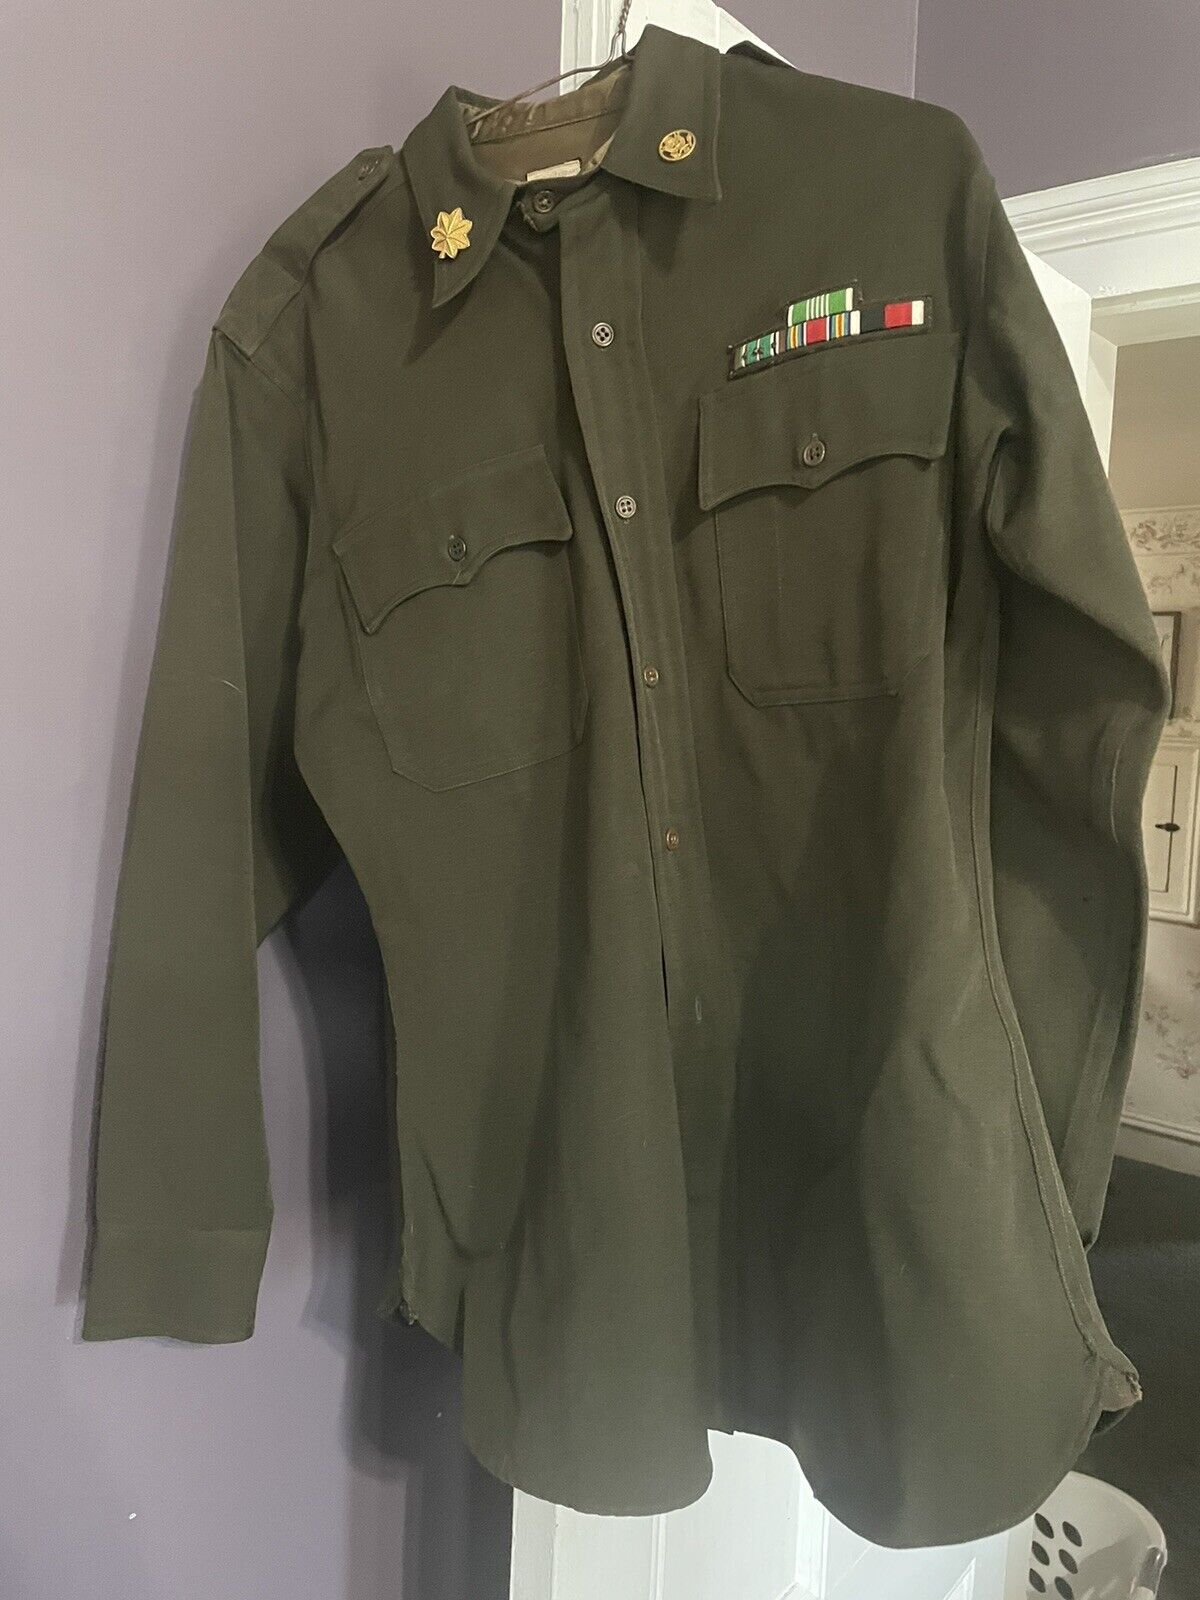 WW2 Named Officers Shirt With Bullion Theater 7th Army Patch And Ribbon Bars